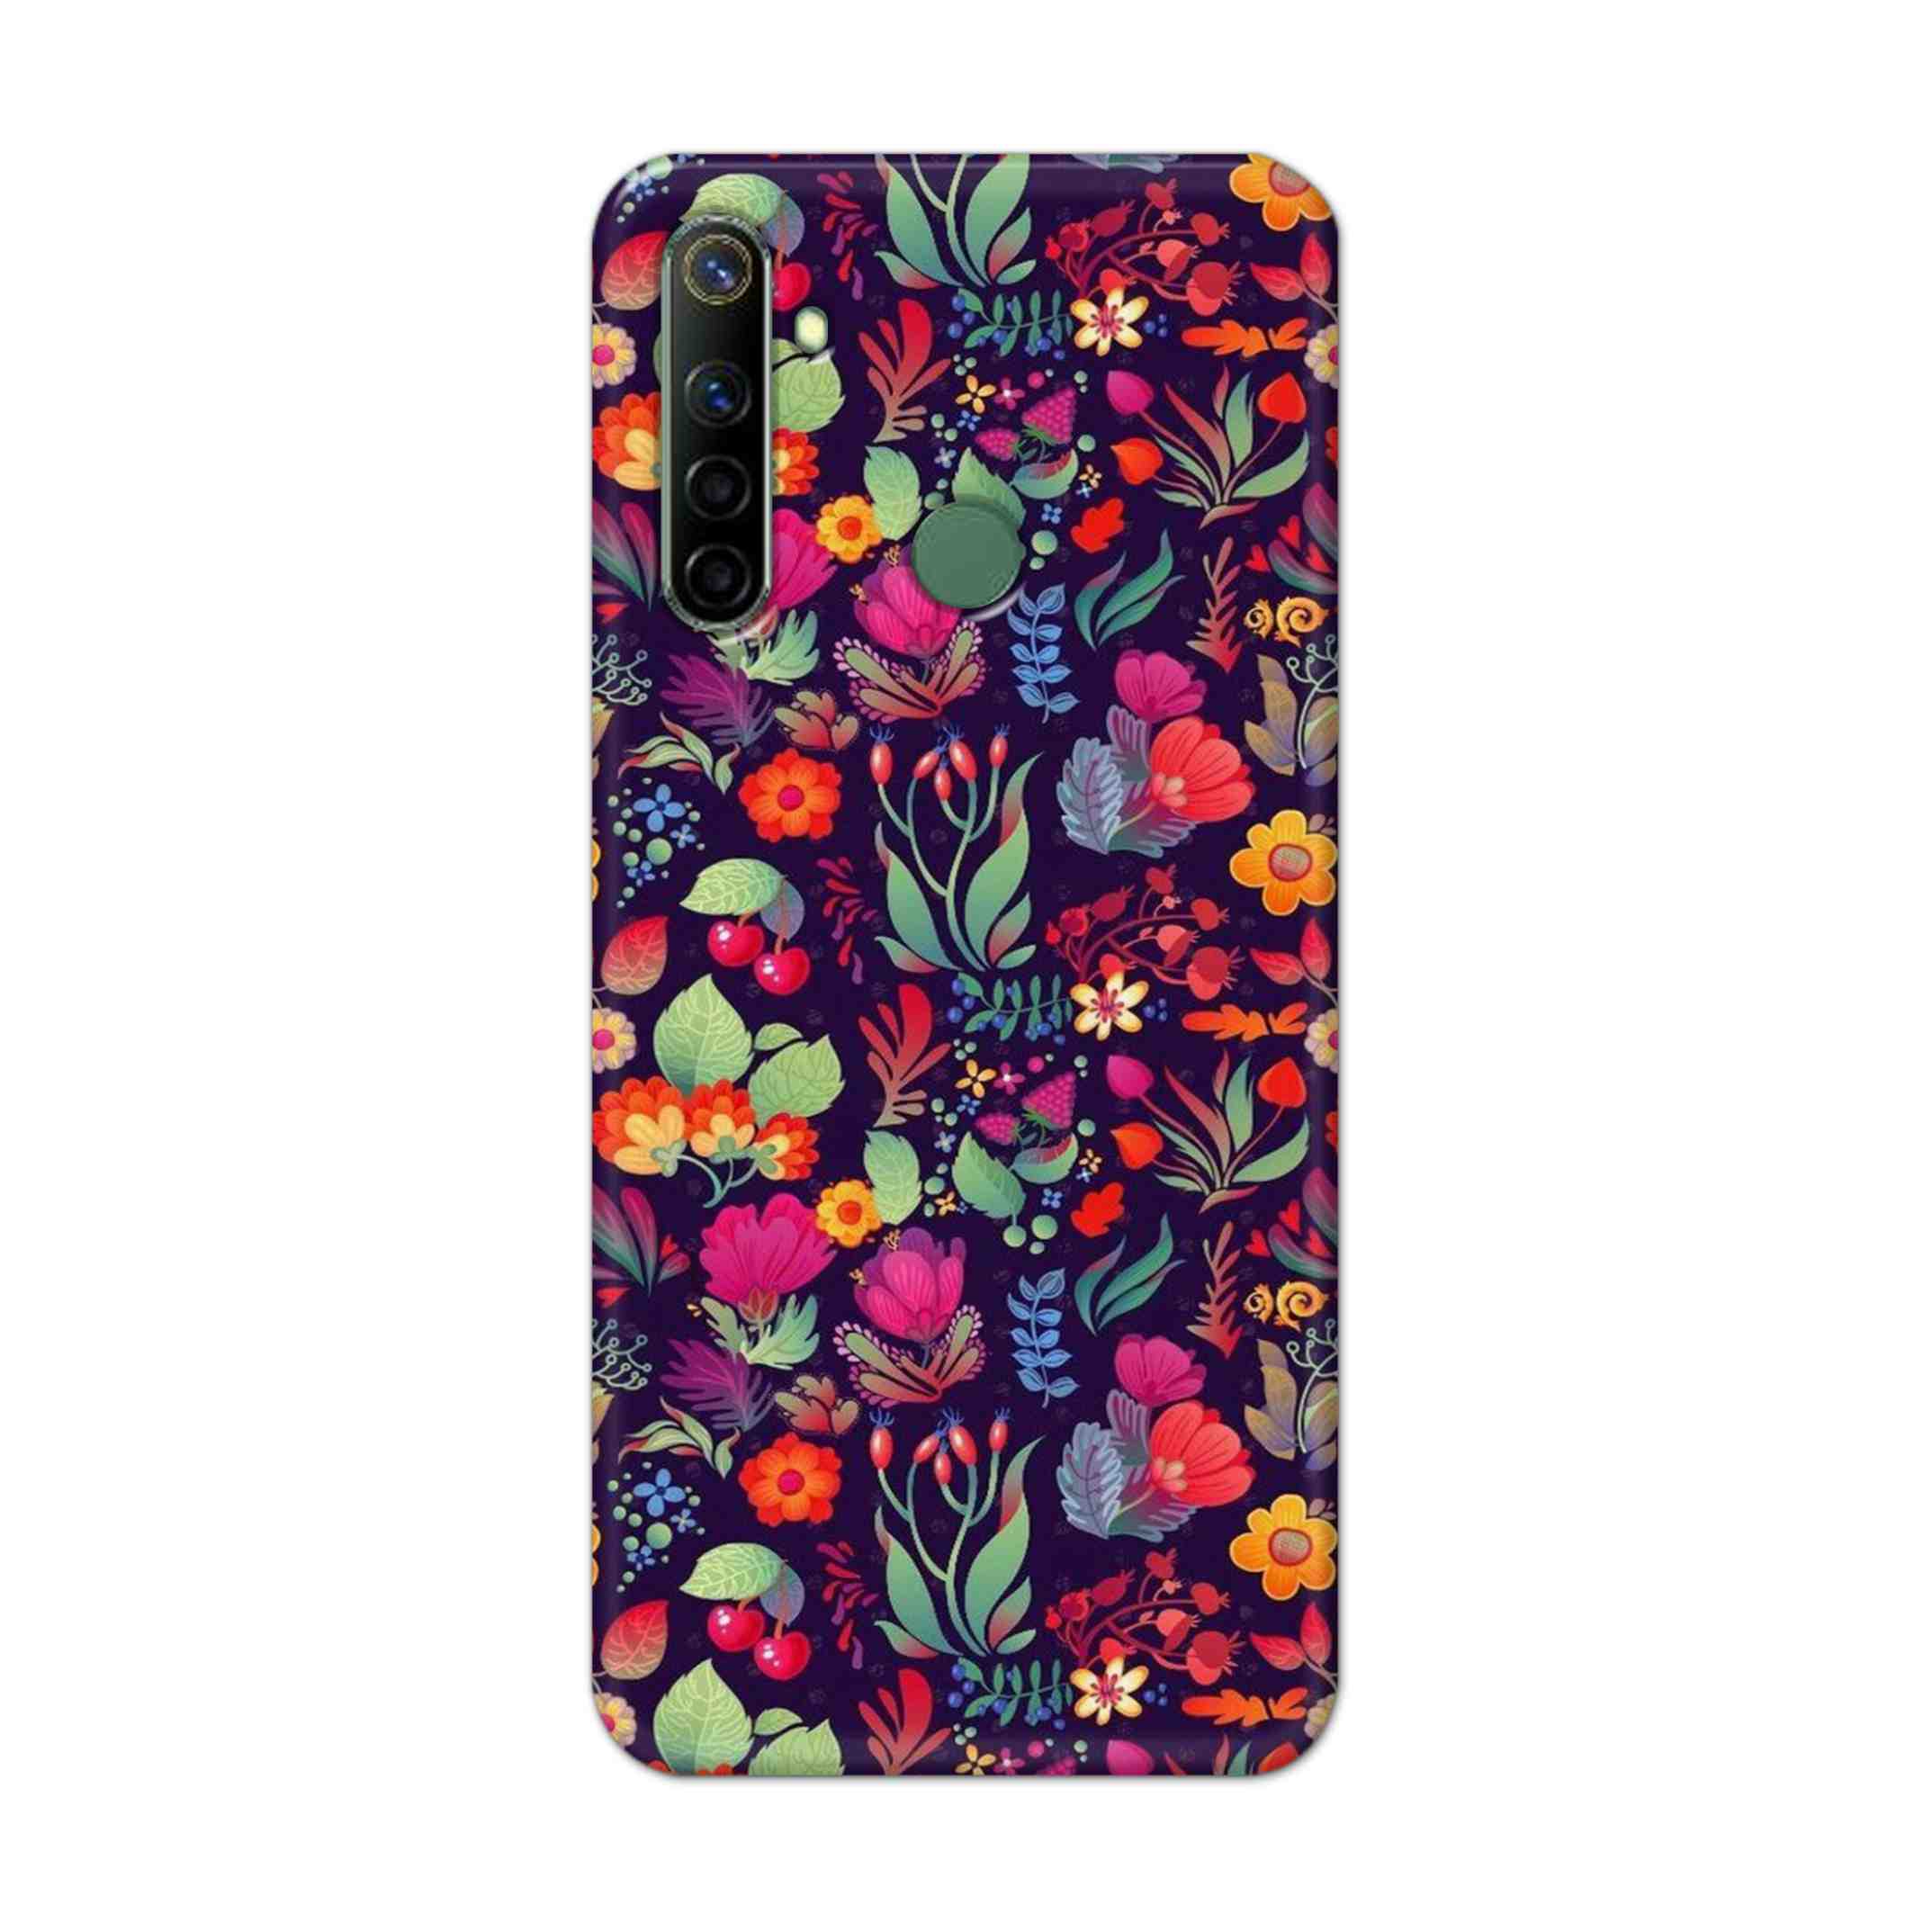 Buy Fruits Flower Hard Back Mobile Phone Case Cover For Realme Narzo 10a Online